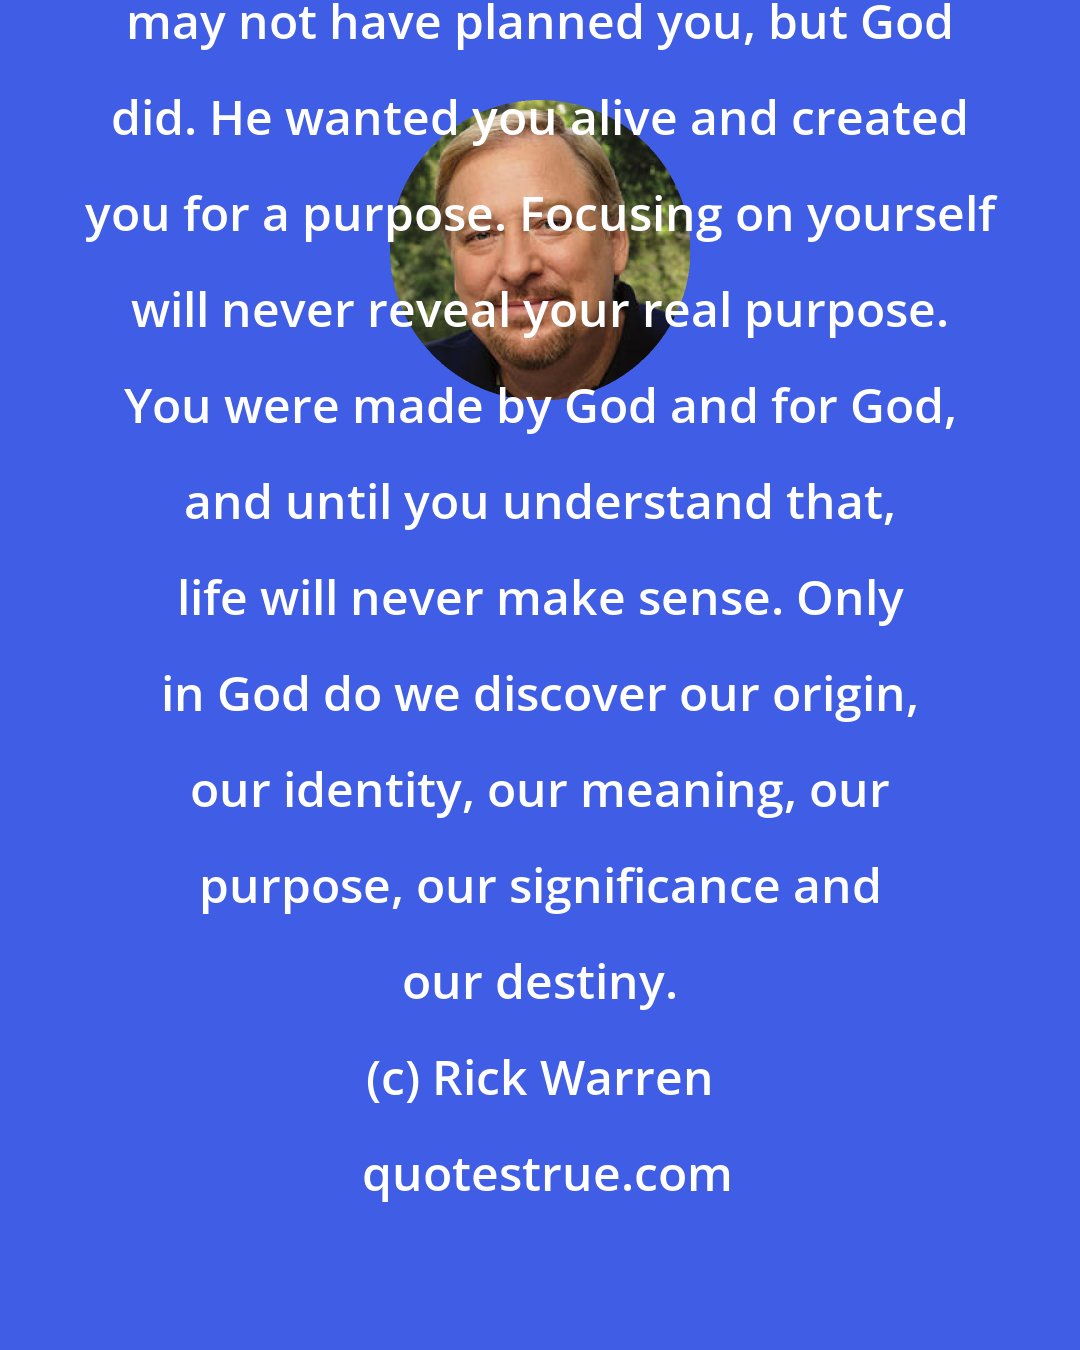 Rick Warren: You are not an accident. Your parents may not have planned you, but God did. He wanted you alive and created you for a purpose. Focusing on yourself will never reveal your real purpose. You were made by God and for God, and until you understand that, life will never make sense. Only in God do we discover our origin, our identity, our meaning, our purpose, our significance and our destiny.